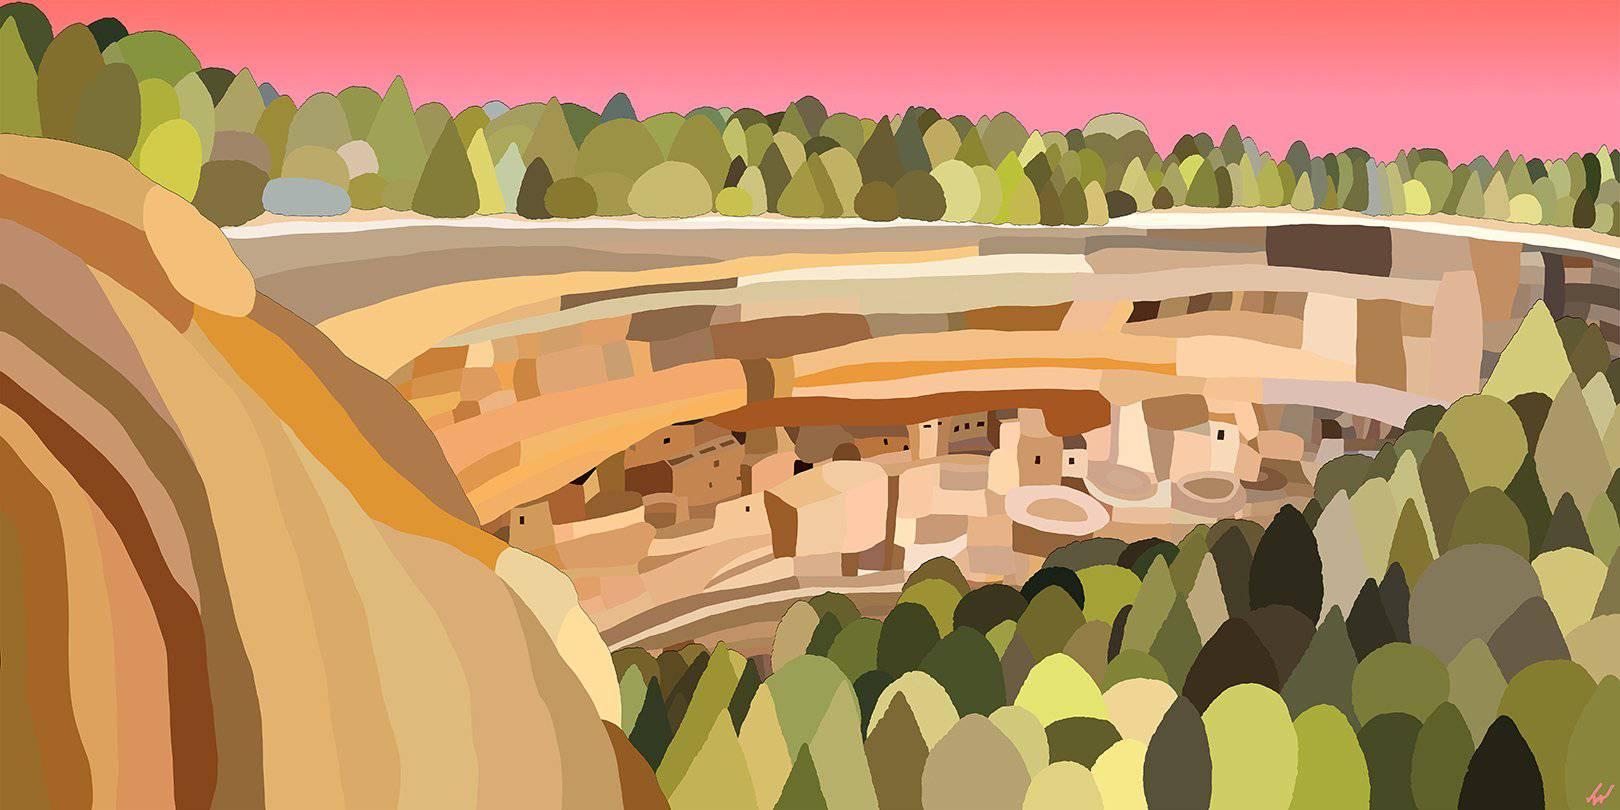 This original modern landscape painting of Mesa Verde National Park is a bold vivid work of contemporary art. The original large-scale digital painting, dye-sublimated onto aluminum by Coloradan artist Topher Straus, takes an original approach to